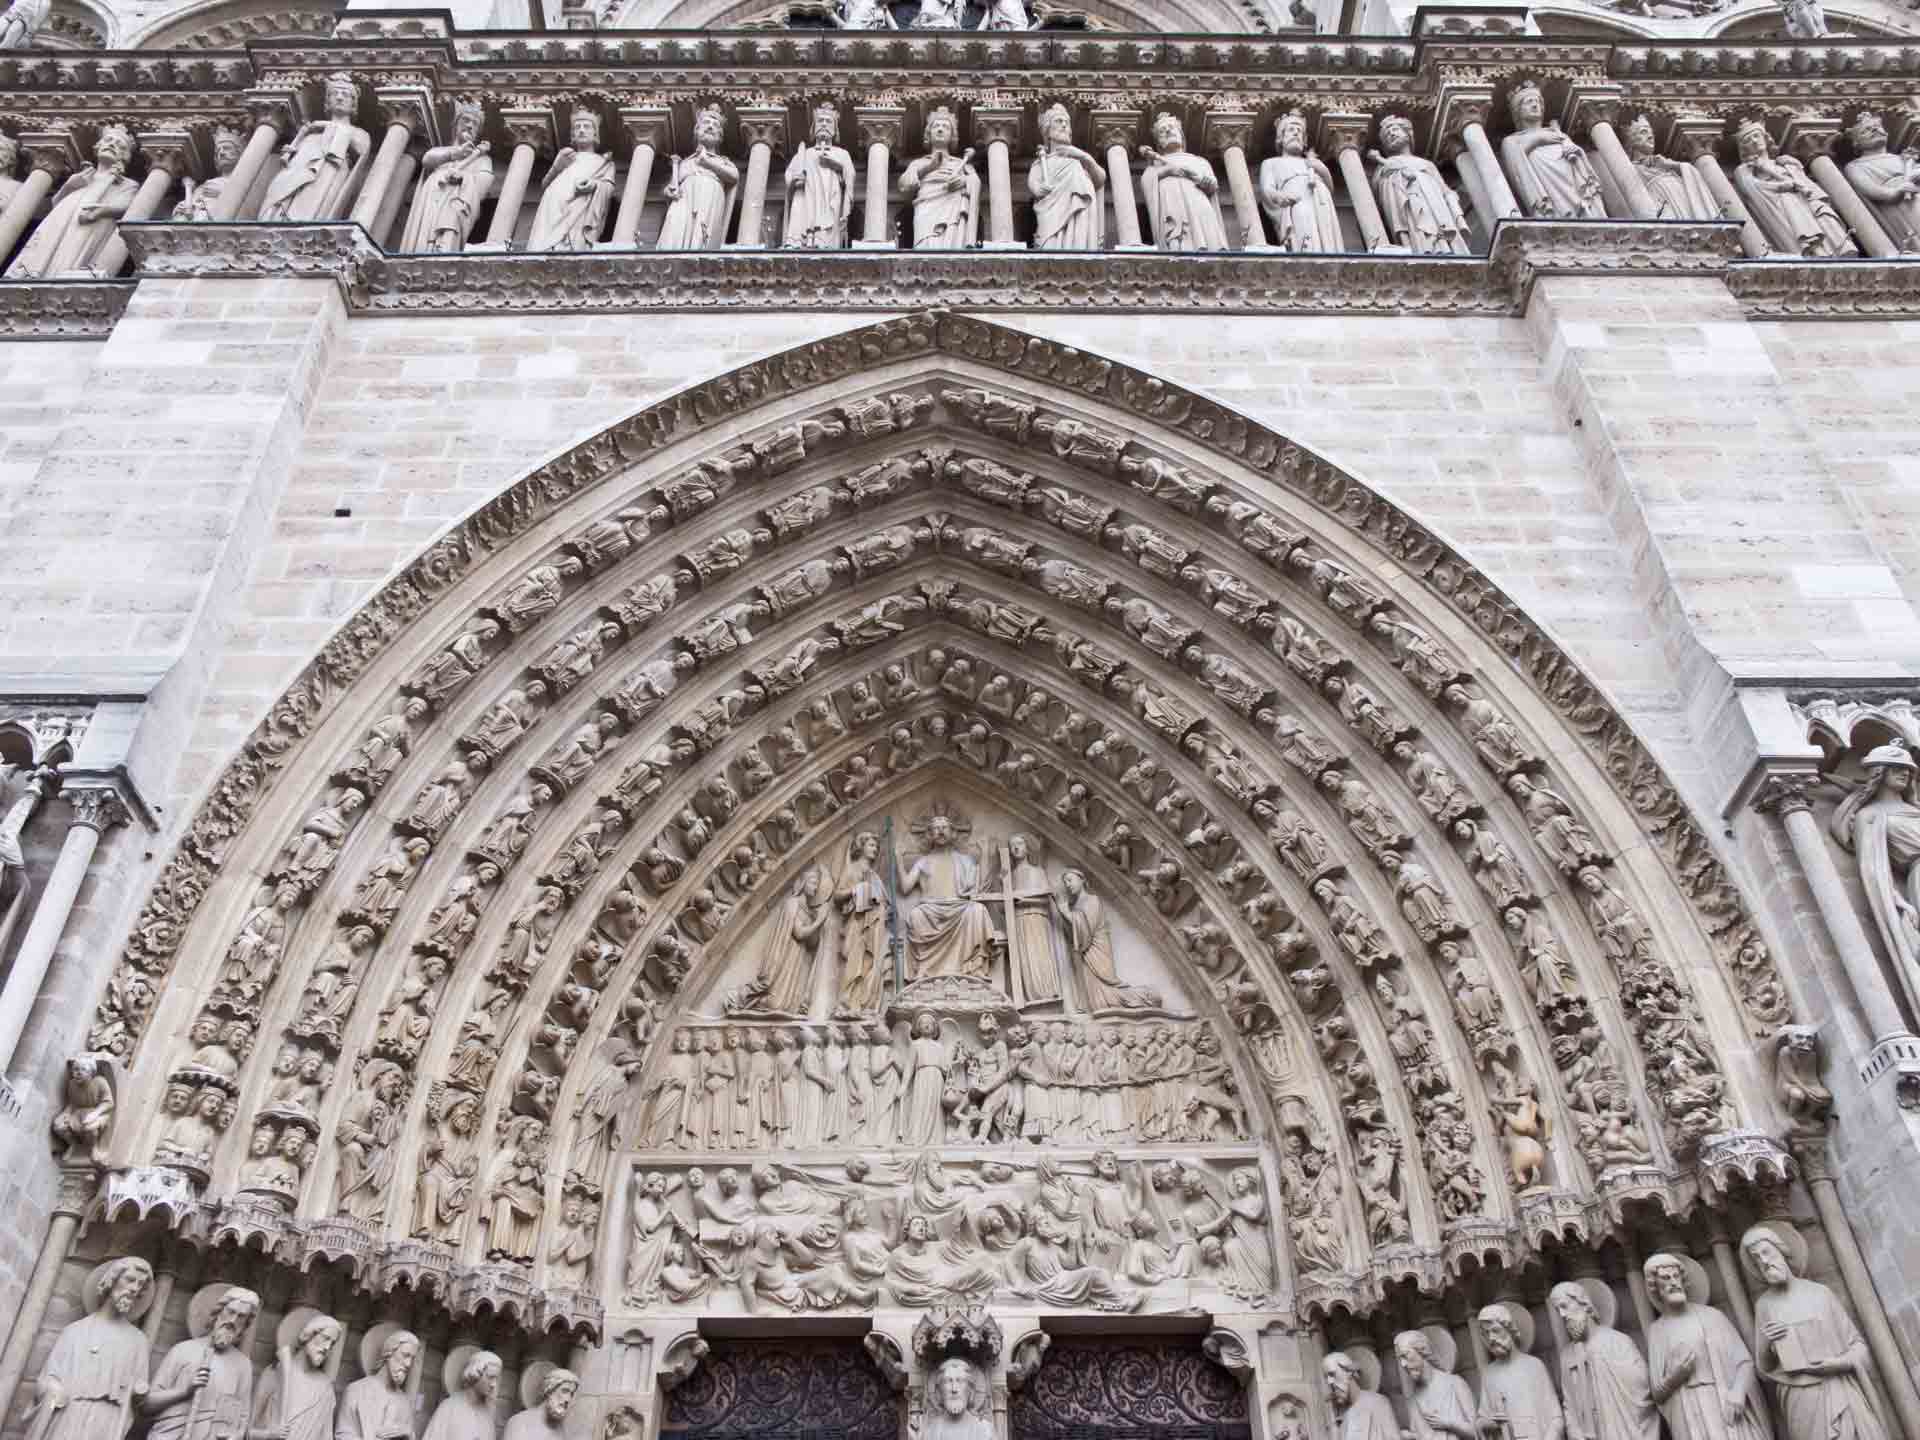 Last Judgement at the entrance of the Notre Dame Cathedral, Paris